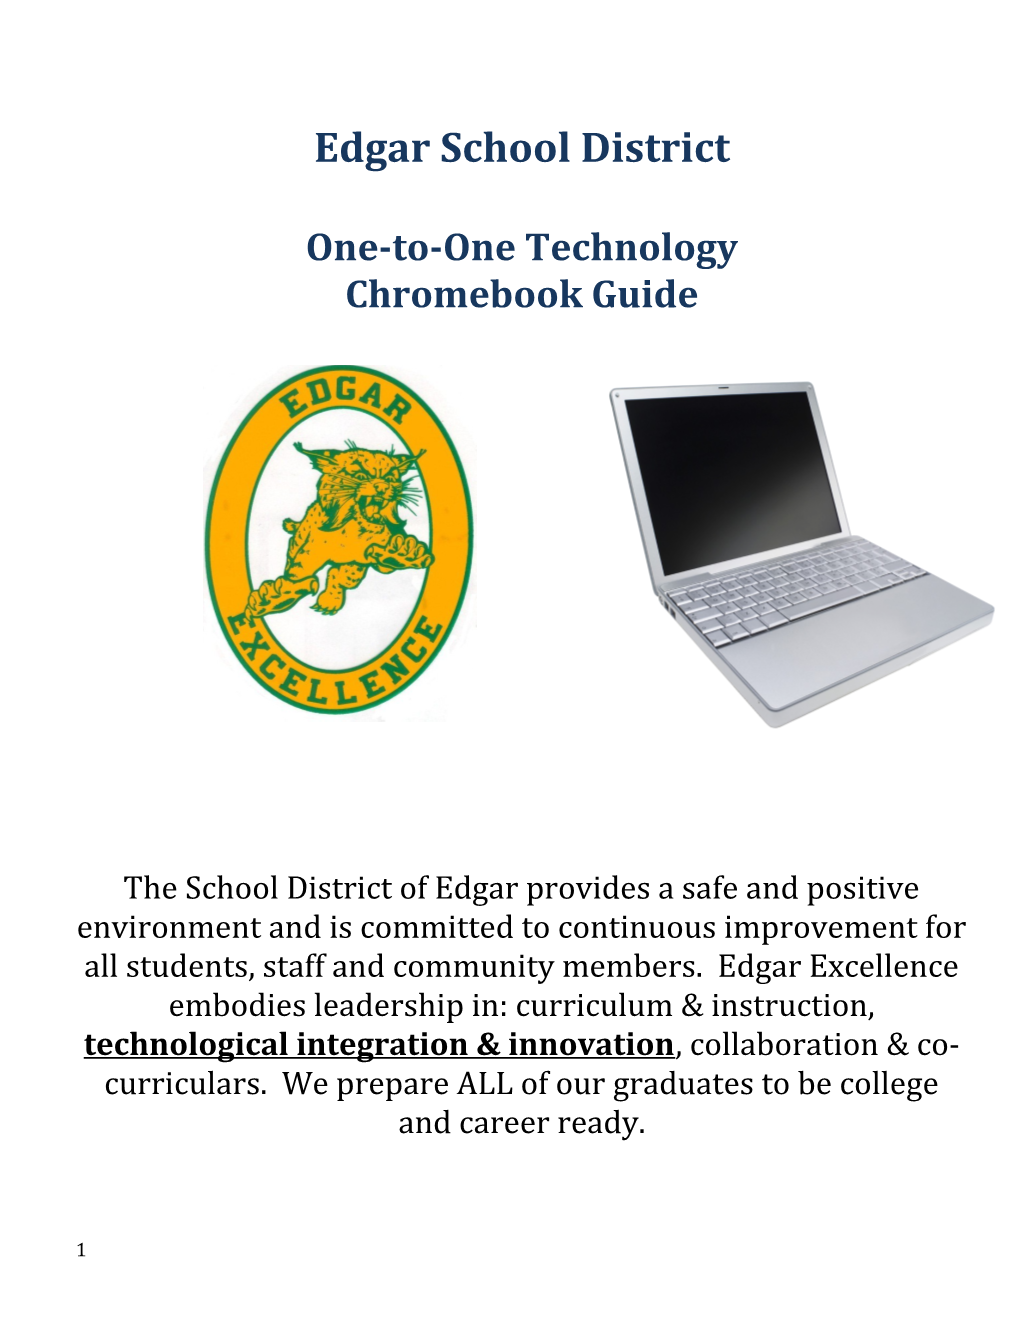 Edgar Chromebook Guide 2014 15 with AUP